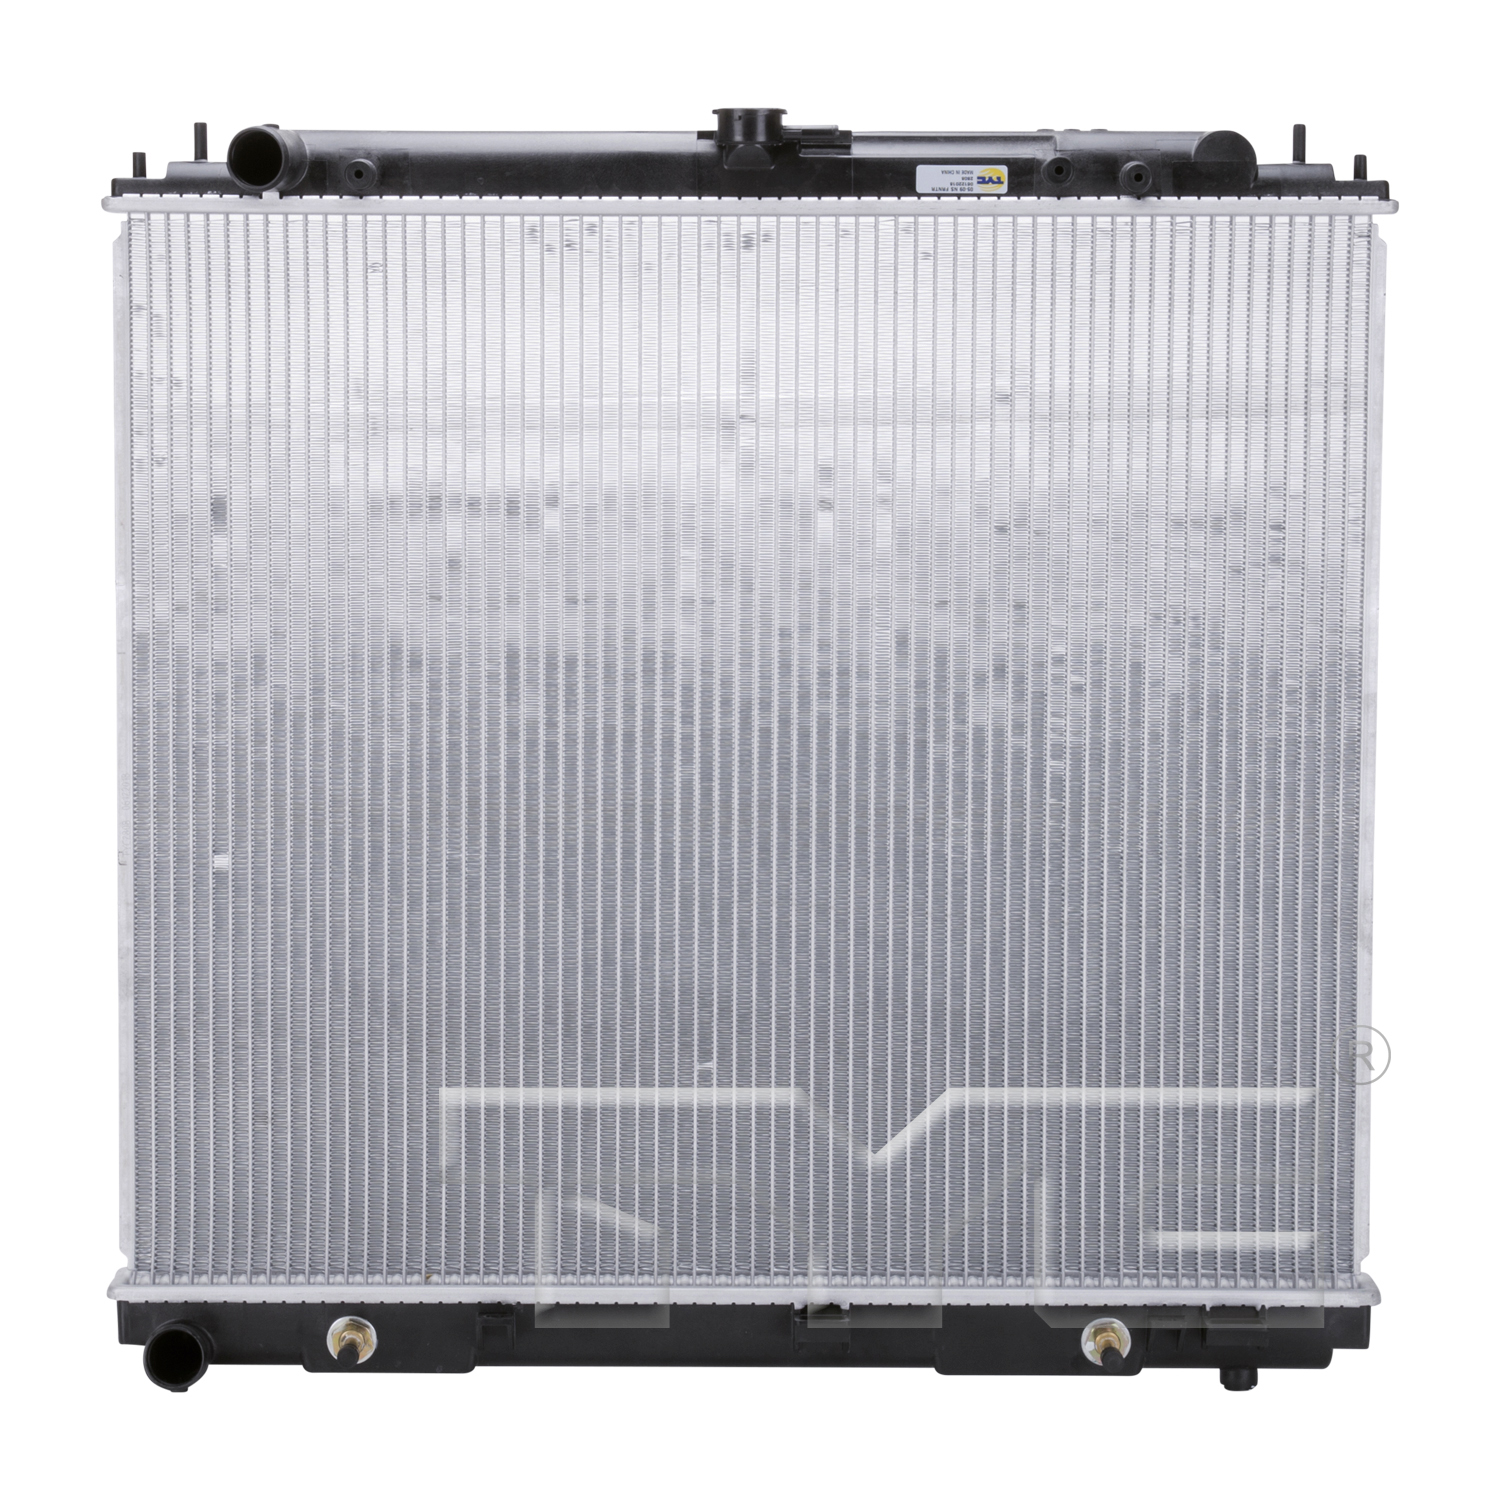 Aftermarket RADIATORS for NISSAN - FRONTIER, FRONTIER,05-21,Radiator assembly